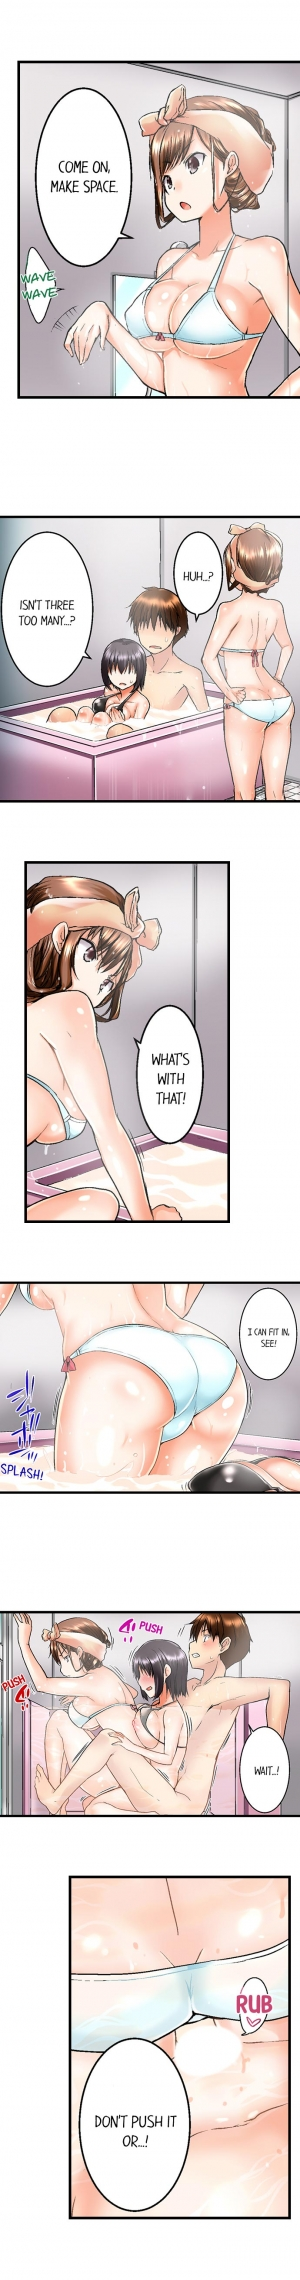 [Kaiduka] My Brother's Slipped Inside Me in The Bathtub (Ongoing) - Page 19